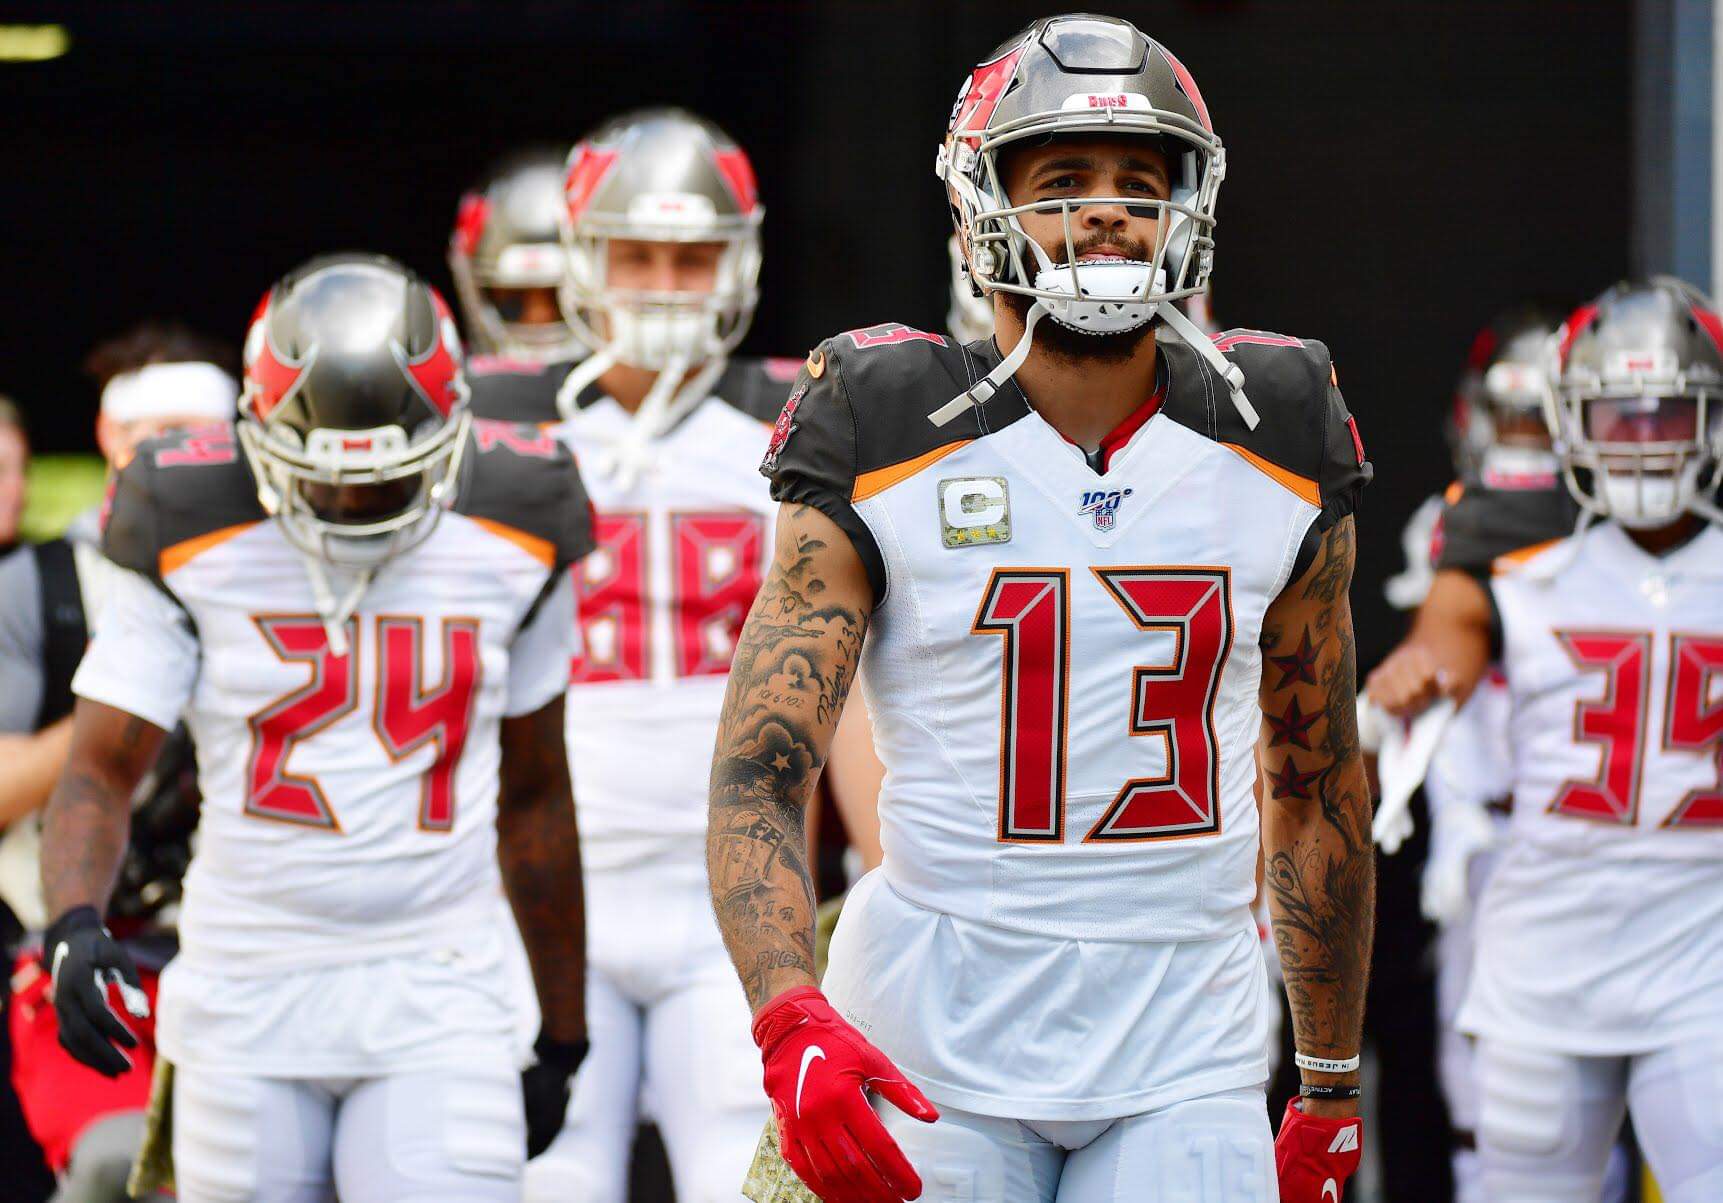 Mike Evans/Getty Images